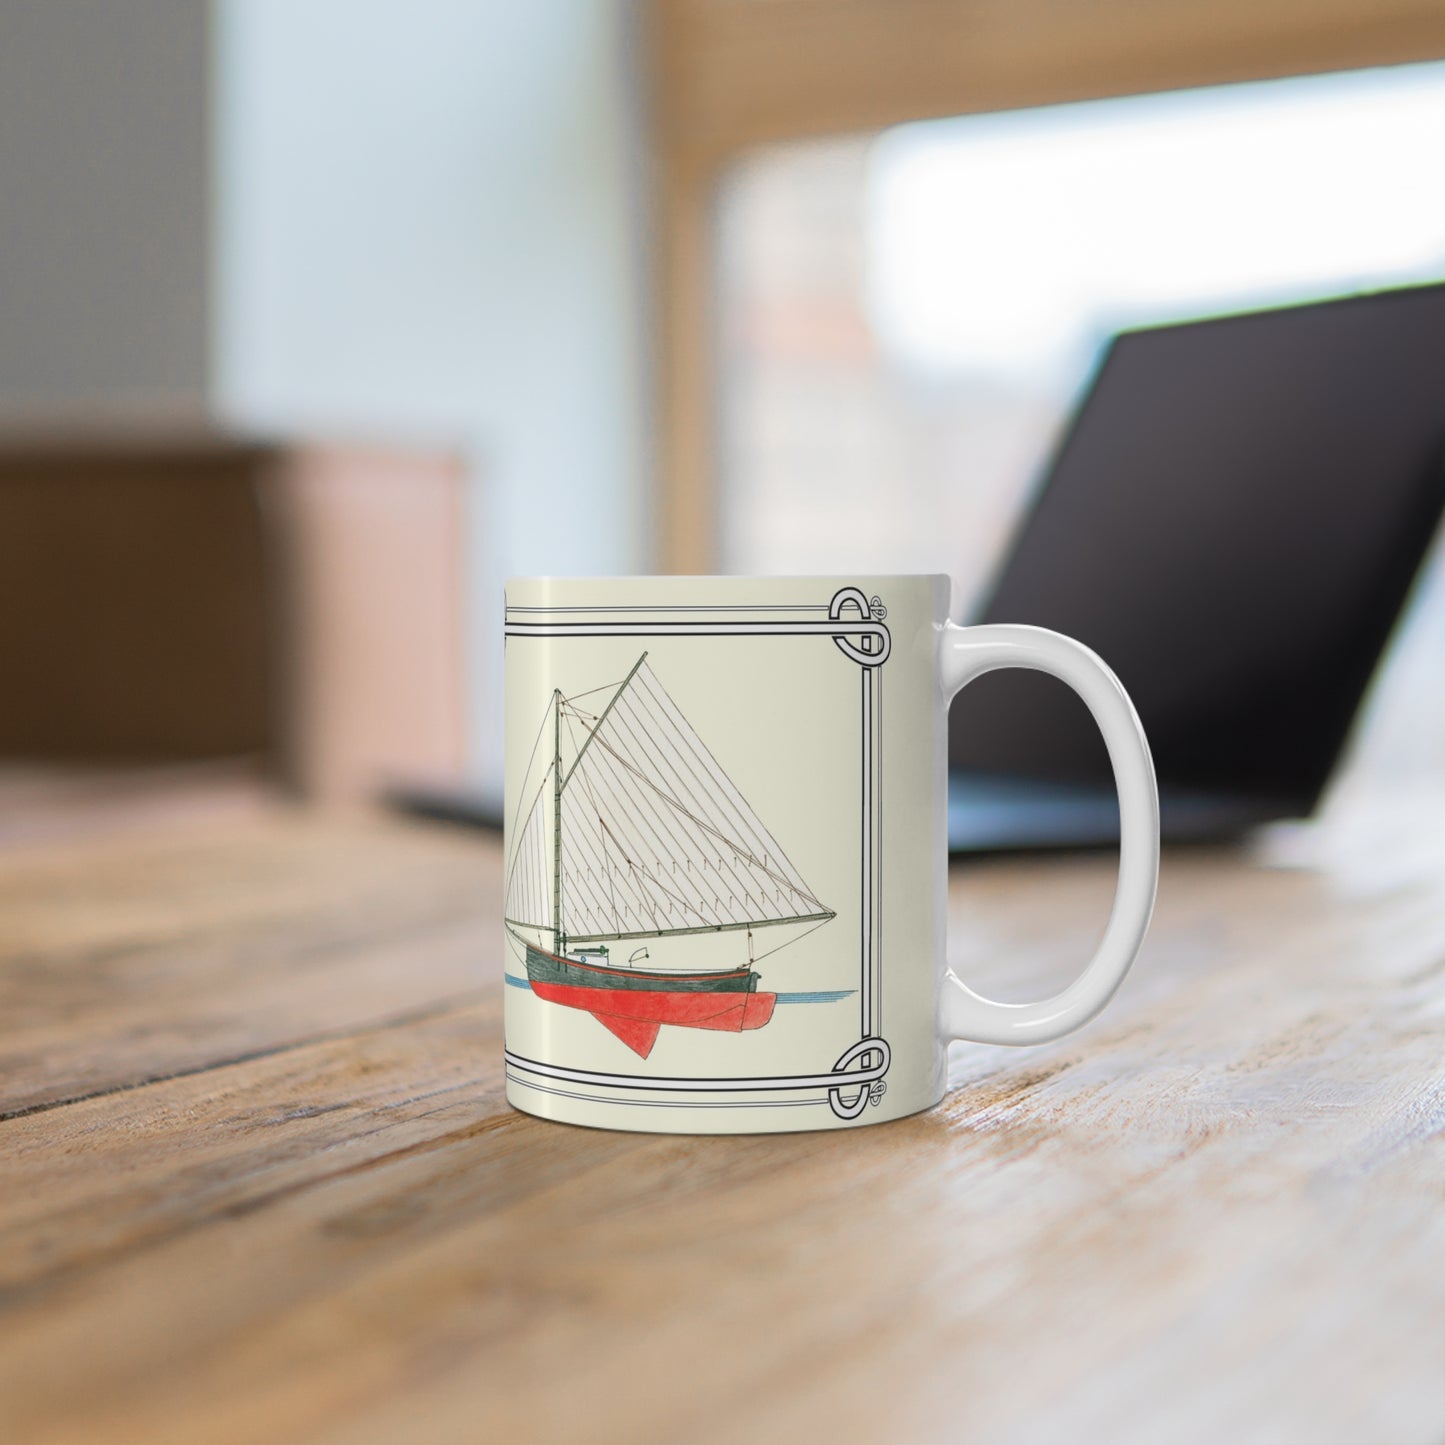 While you work at your laptop, enjoy your favorite beverage in the Breeze 11 oz. Mug. Breeze was a  Noank Fishing sloop.